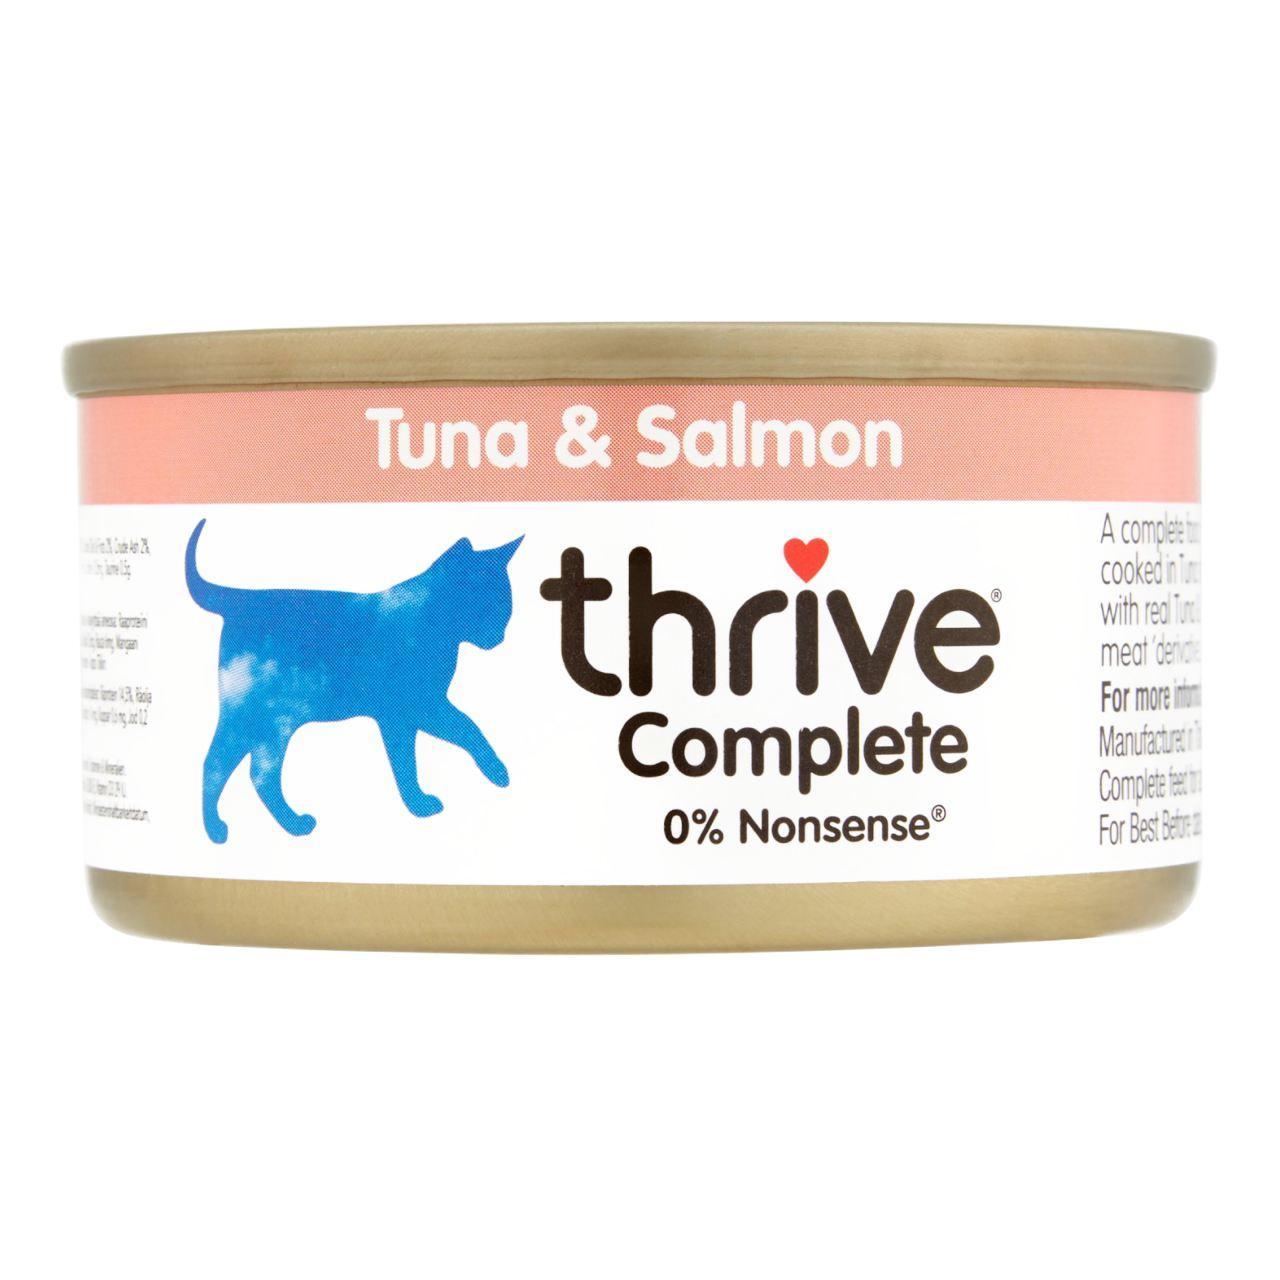 An image of Thrive Complete Tuna & Salmon Cat Food